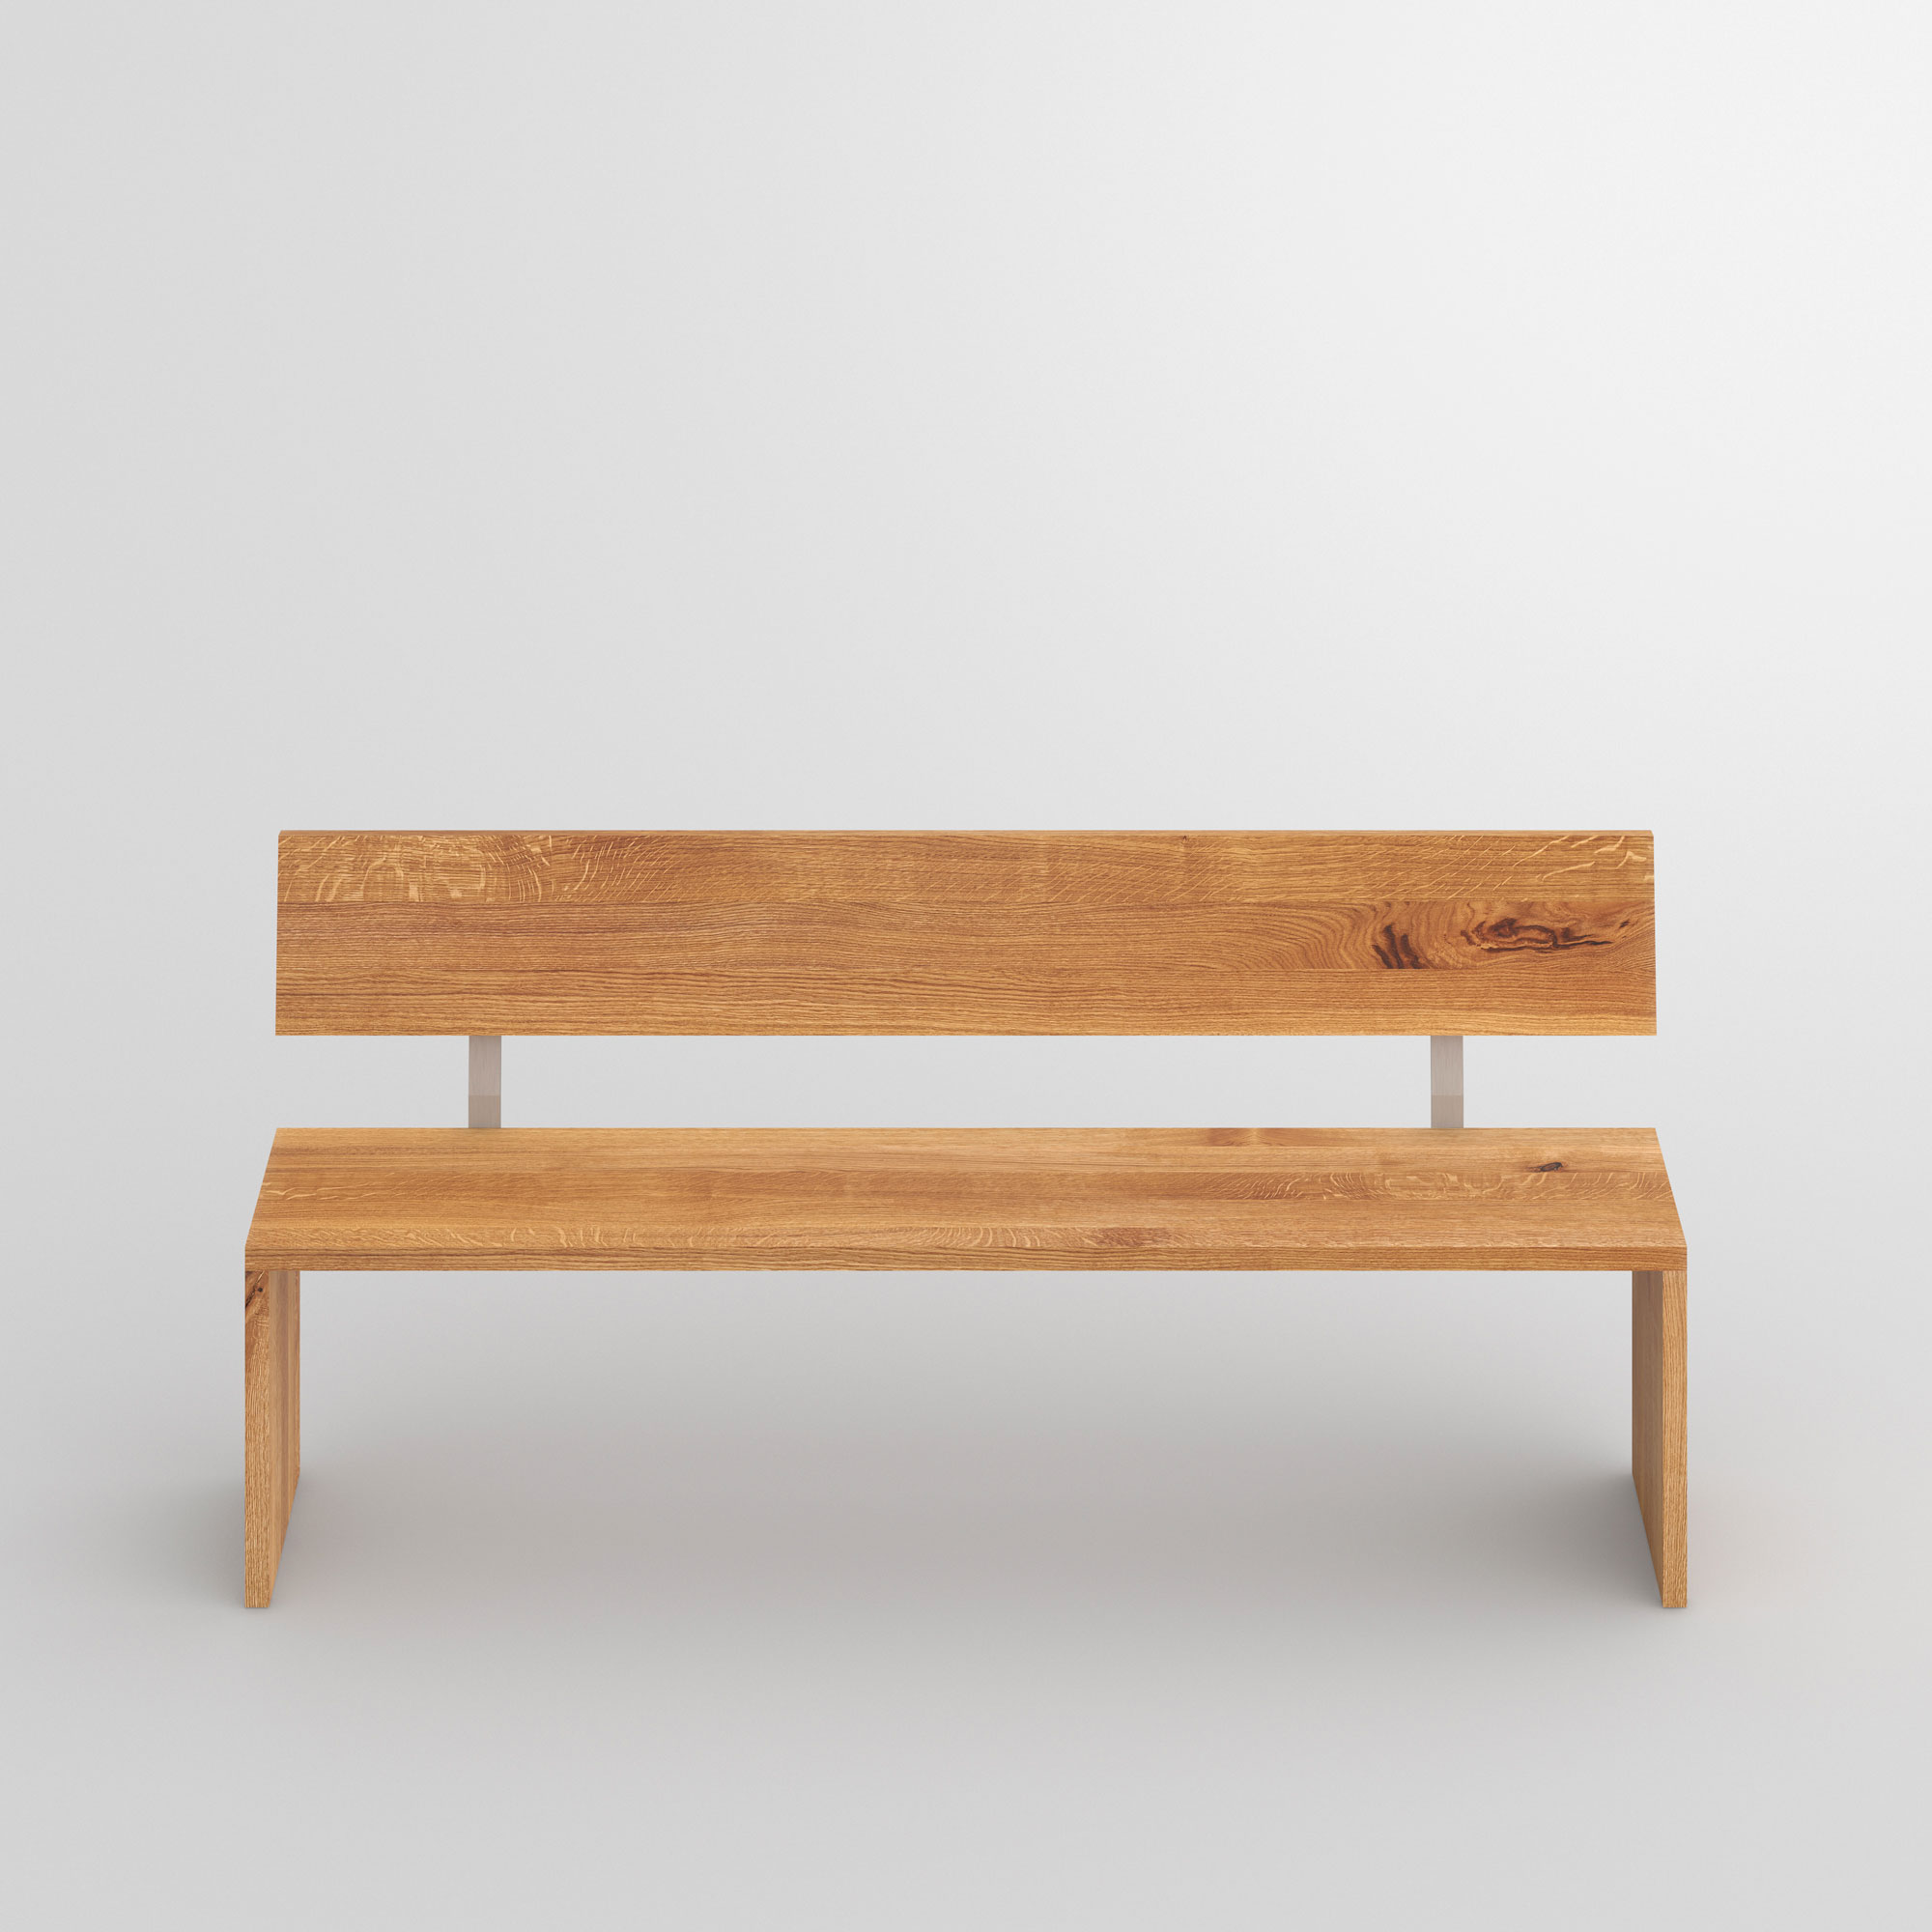 Solid Wood Bench MENA 3 cam2 custom made in solid wood by vitamin design